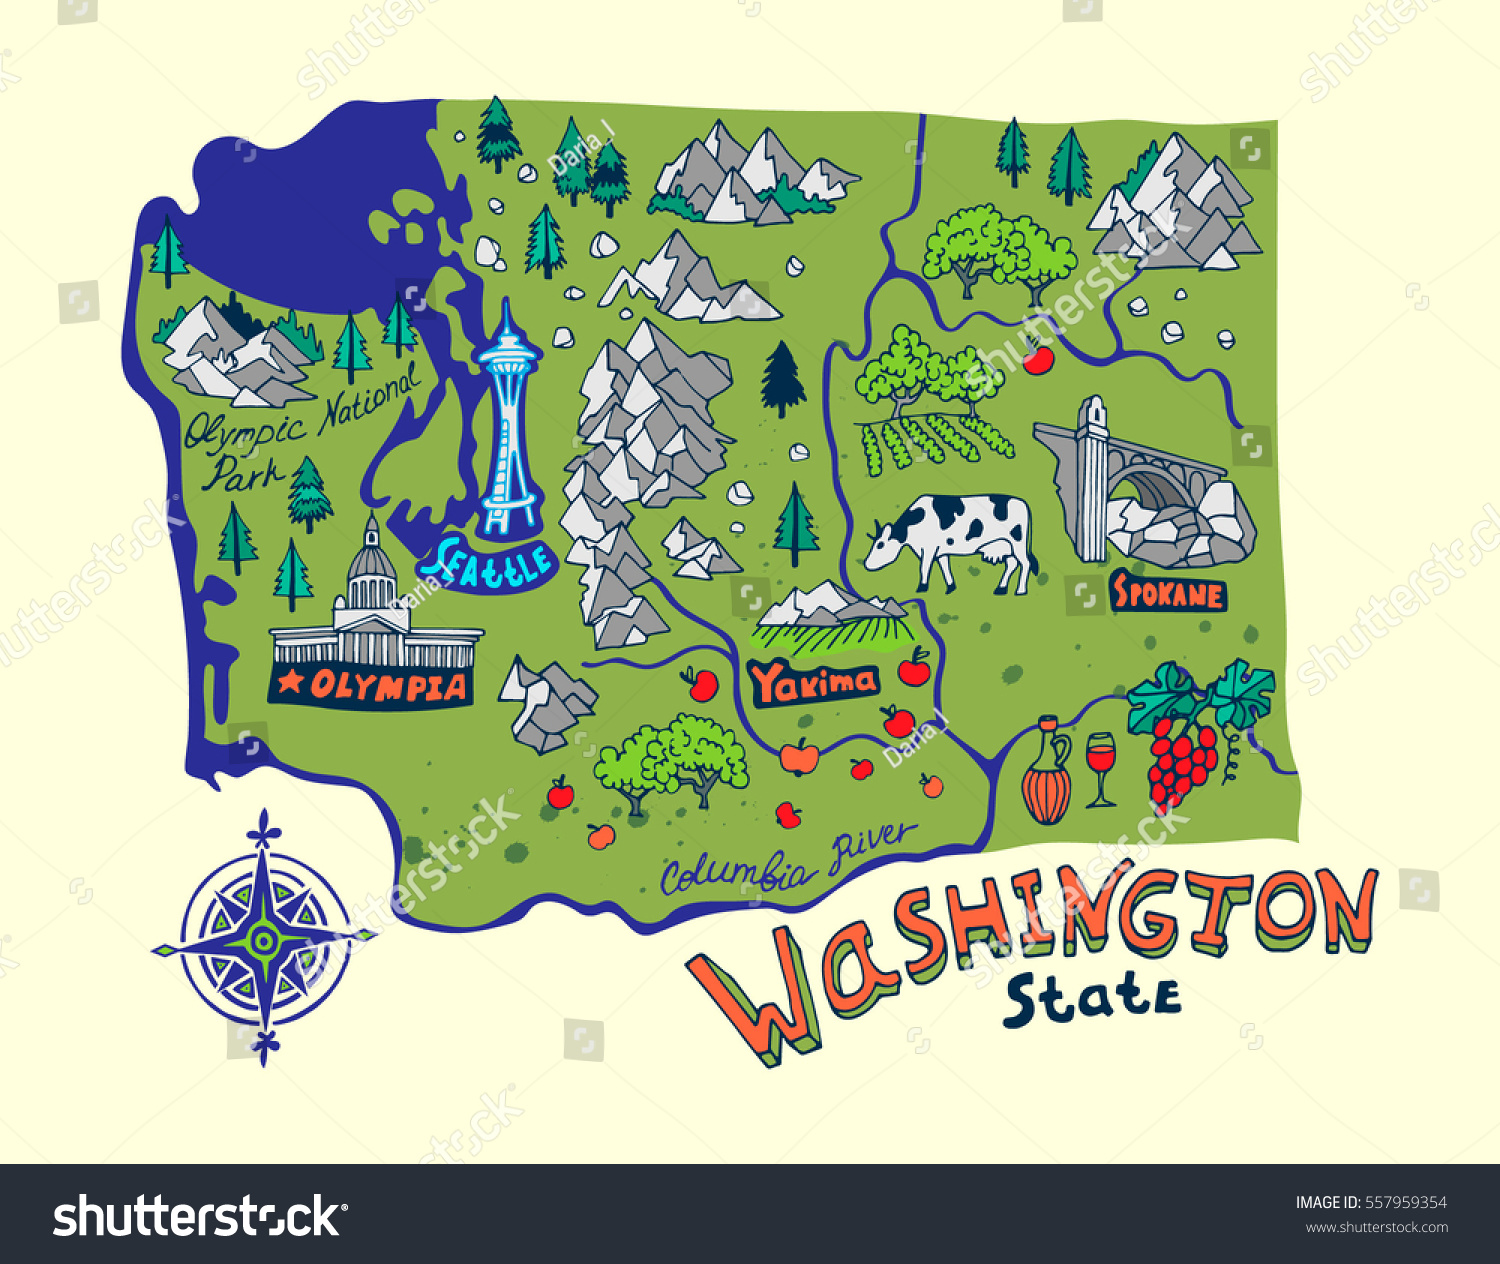 Cartoon Map Washington State Travel Attractions Stock Vector Royalty Free 557959354 Shutterstock 3195